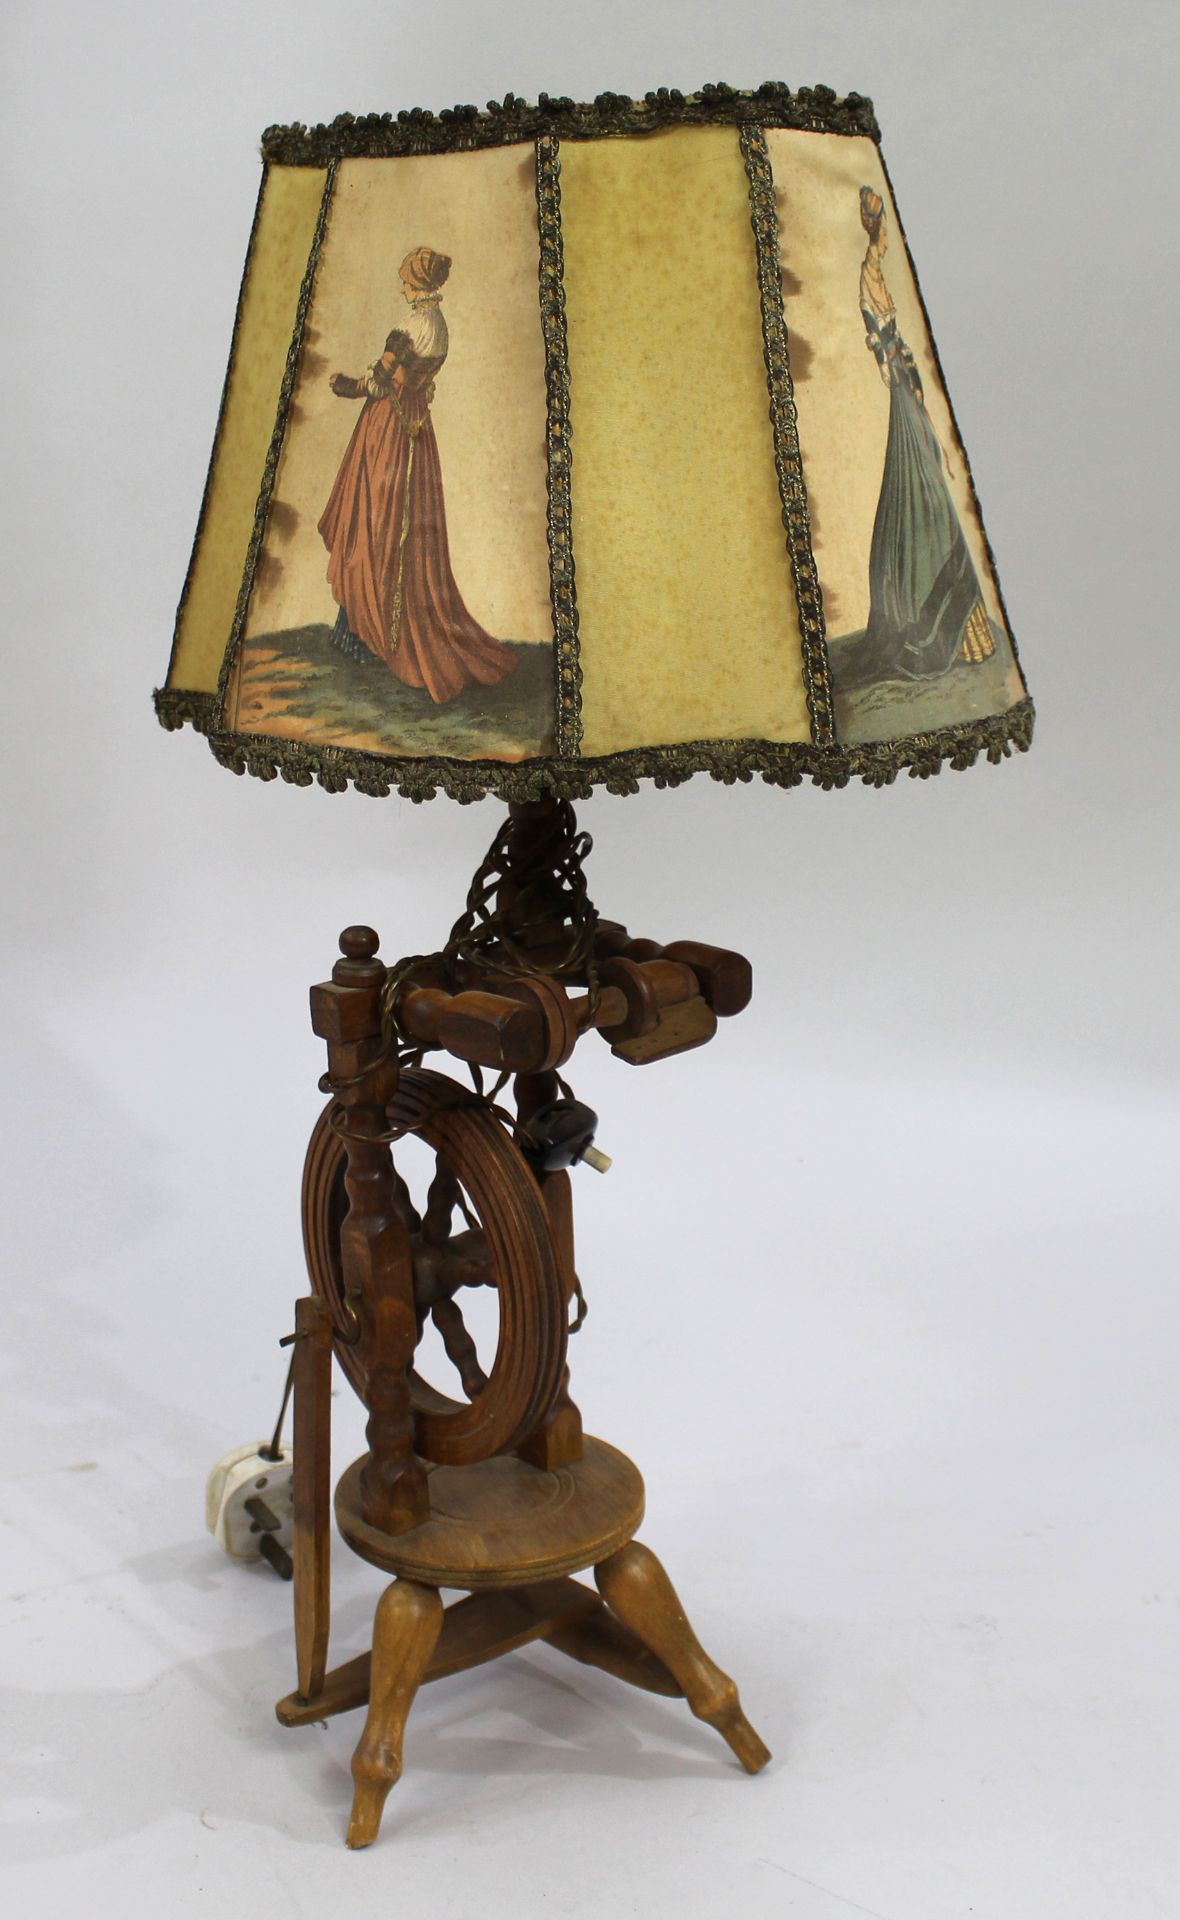 Collection of 6 Vintage Table Lamps - Image 11 of 17